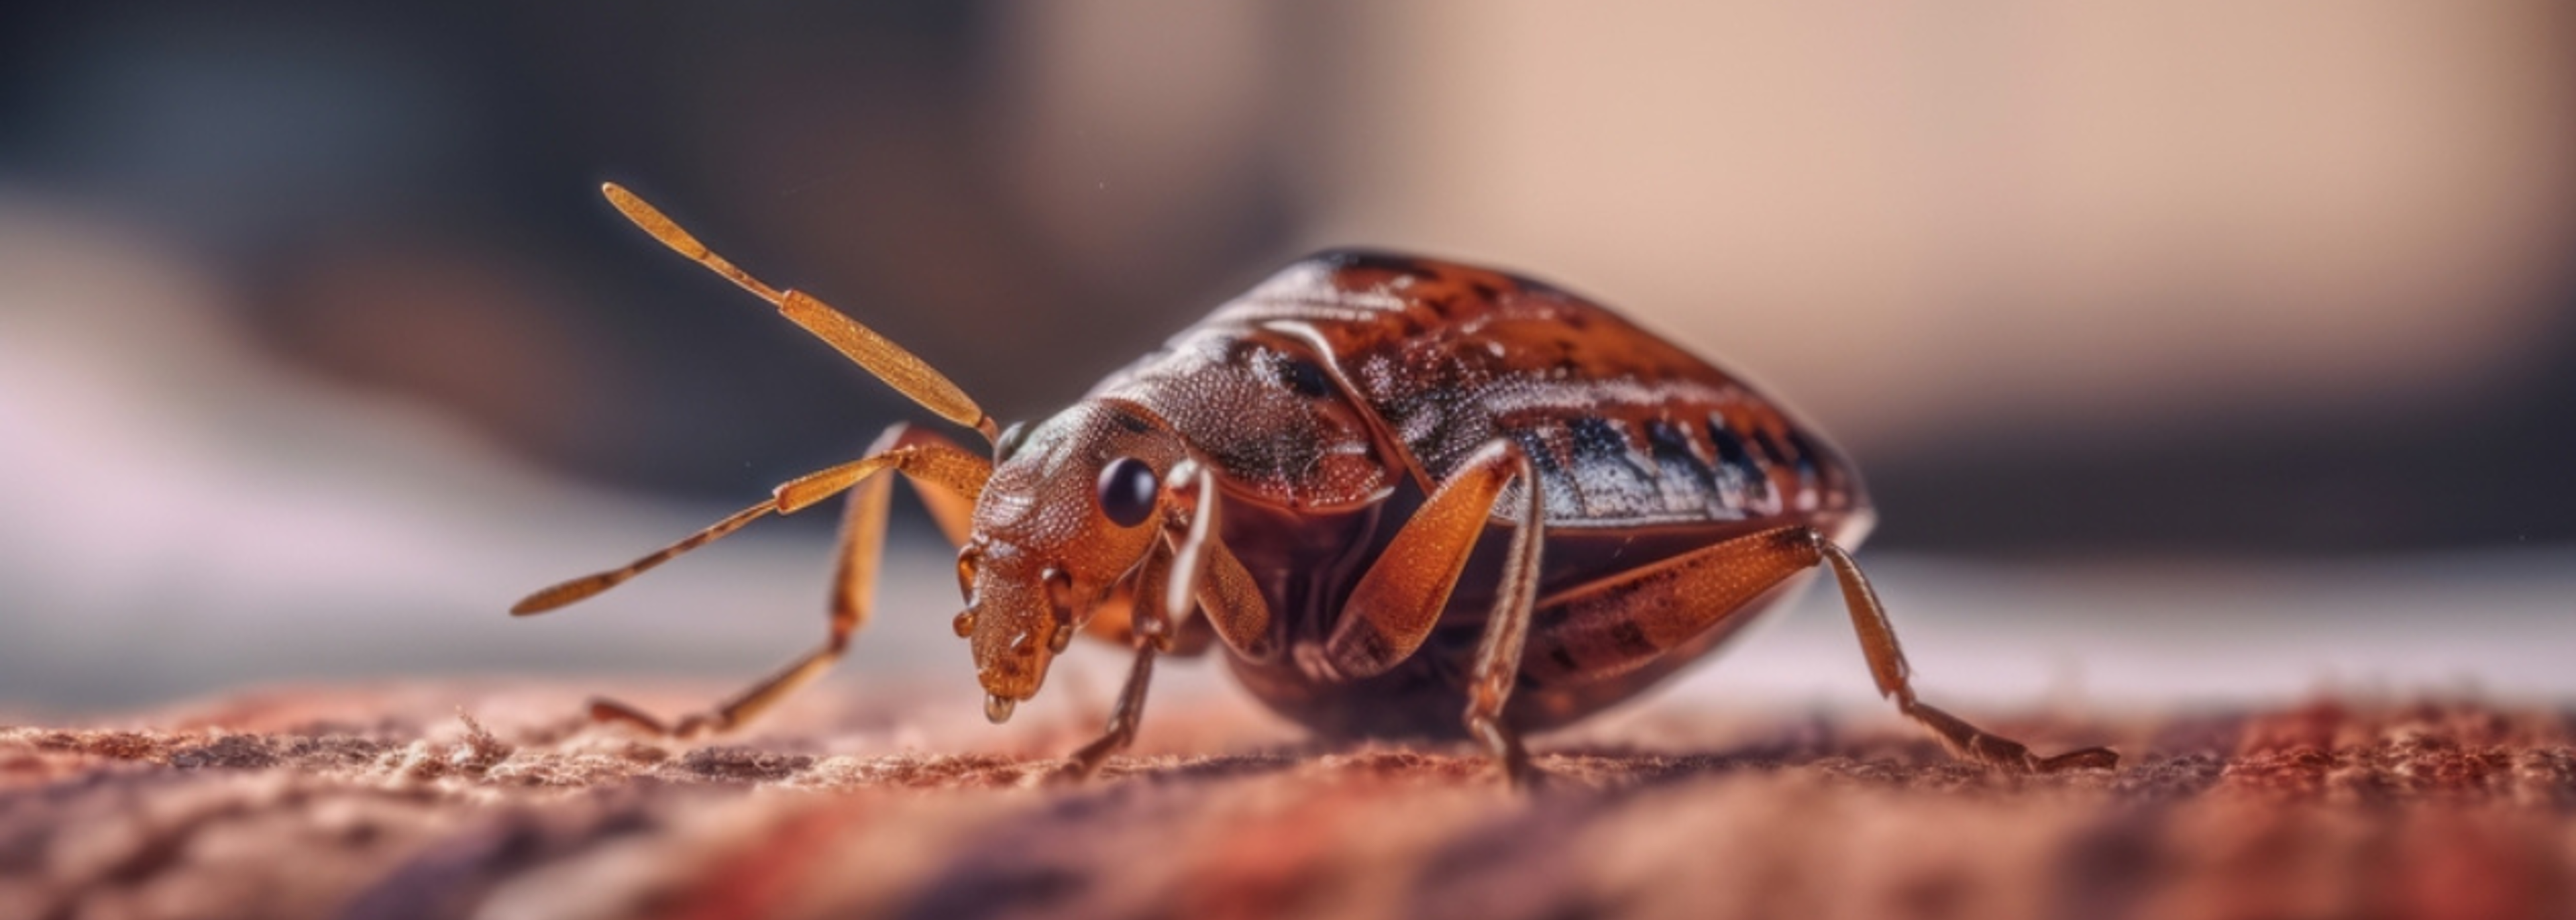 Bed bug infestations are growing in the UK